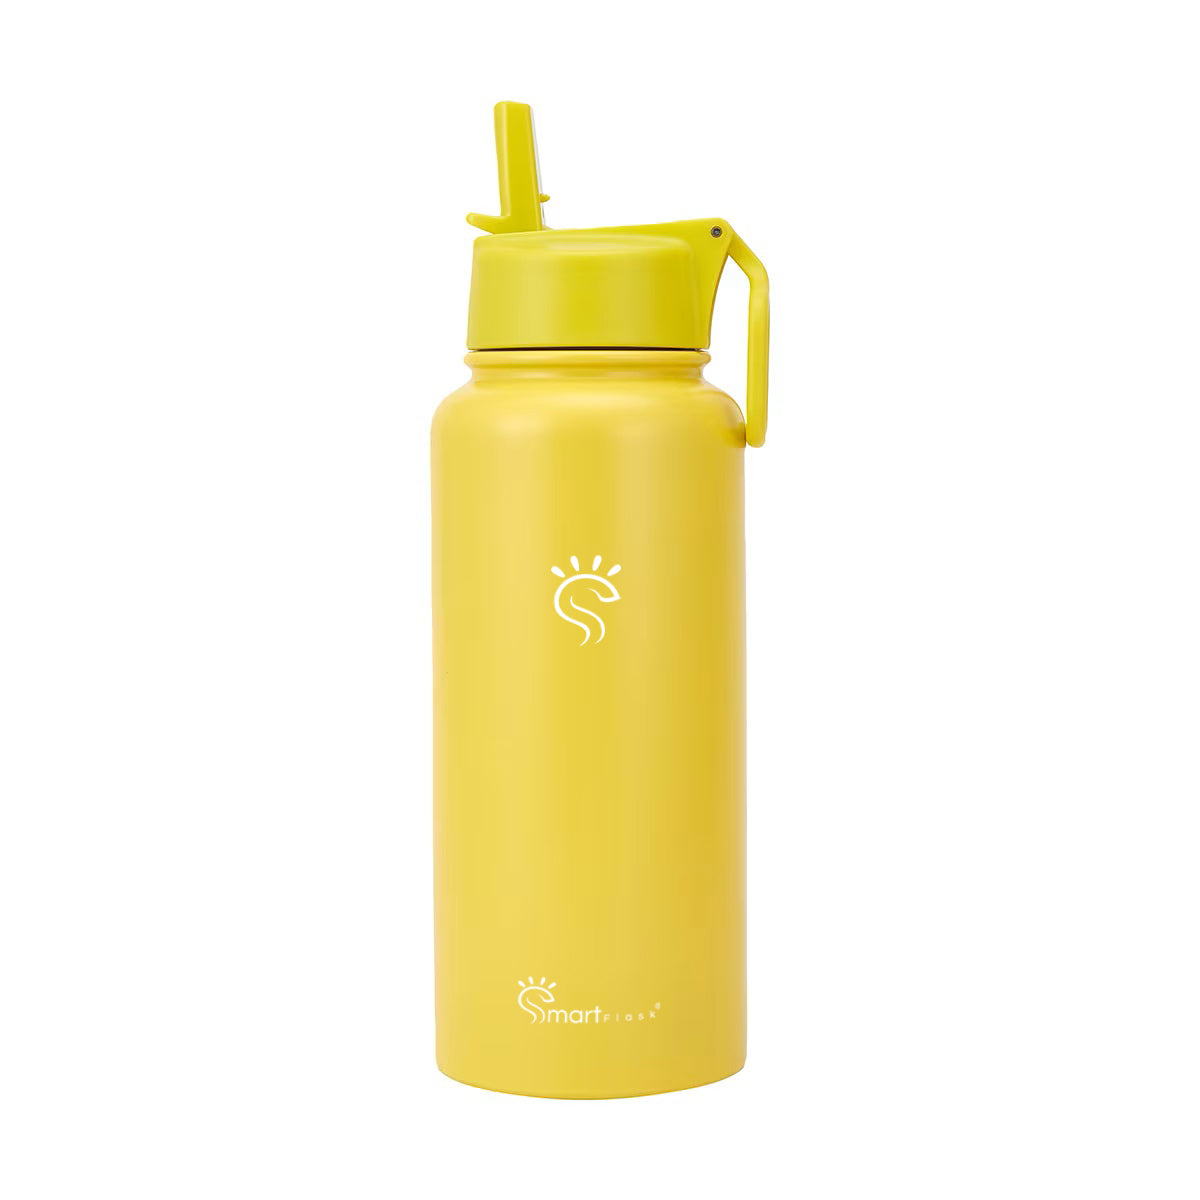 Lime Smart Reusable Water Bottle with Straw